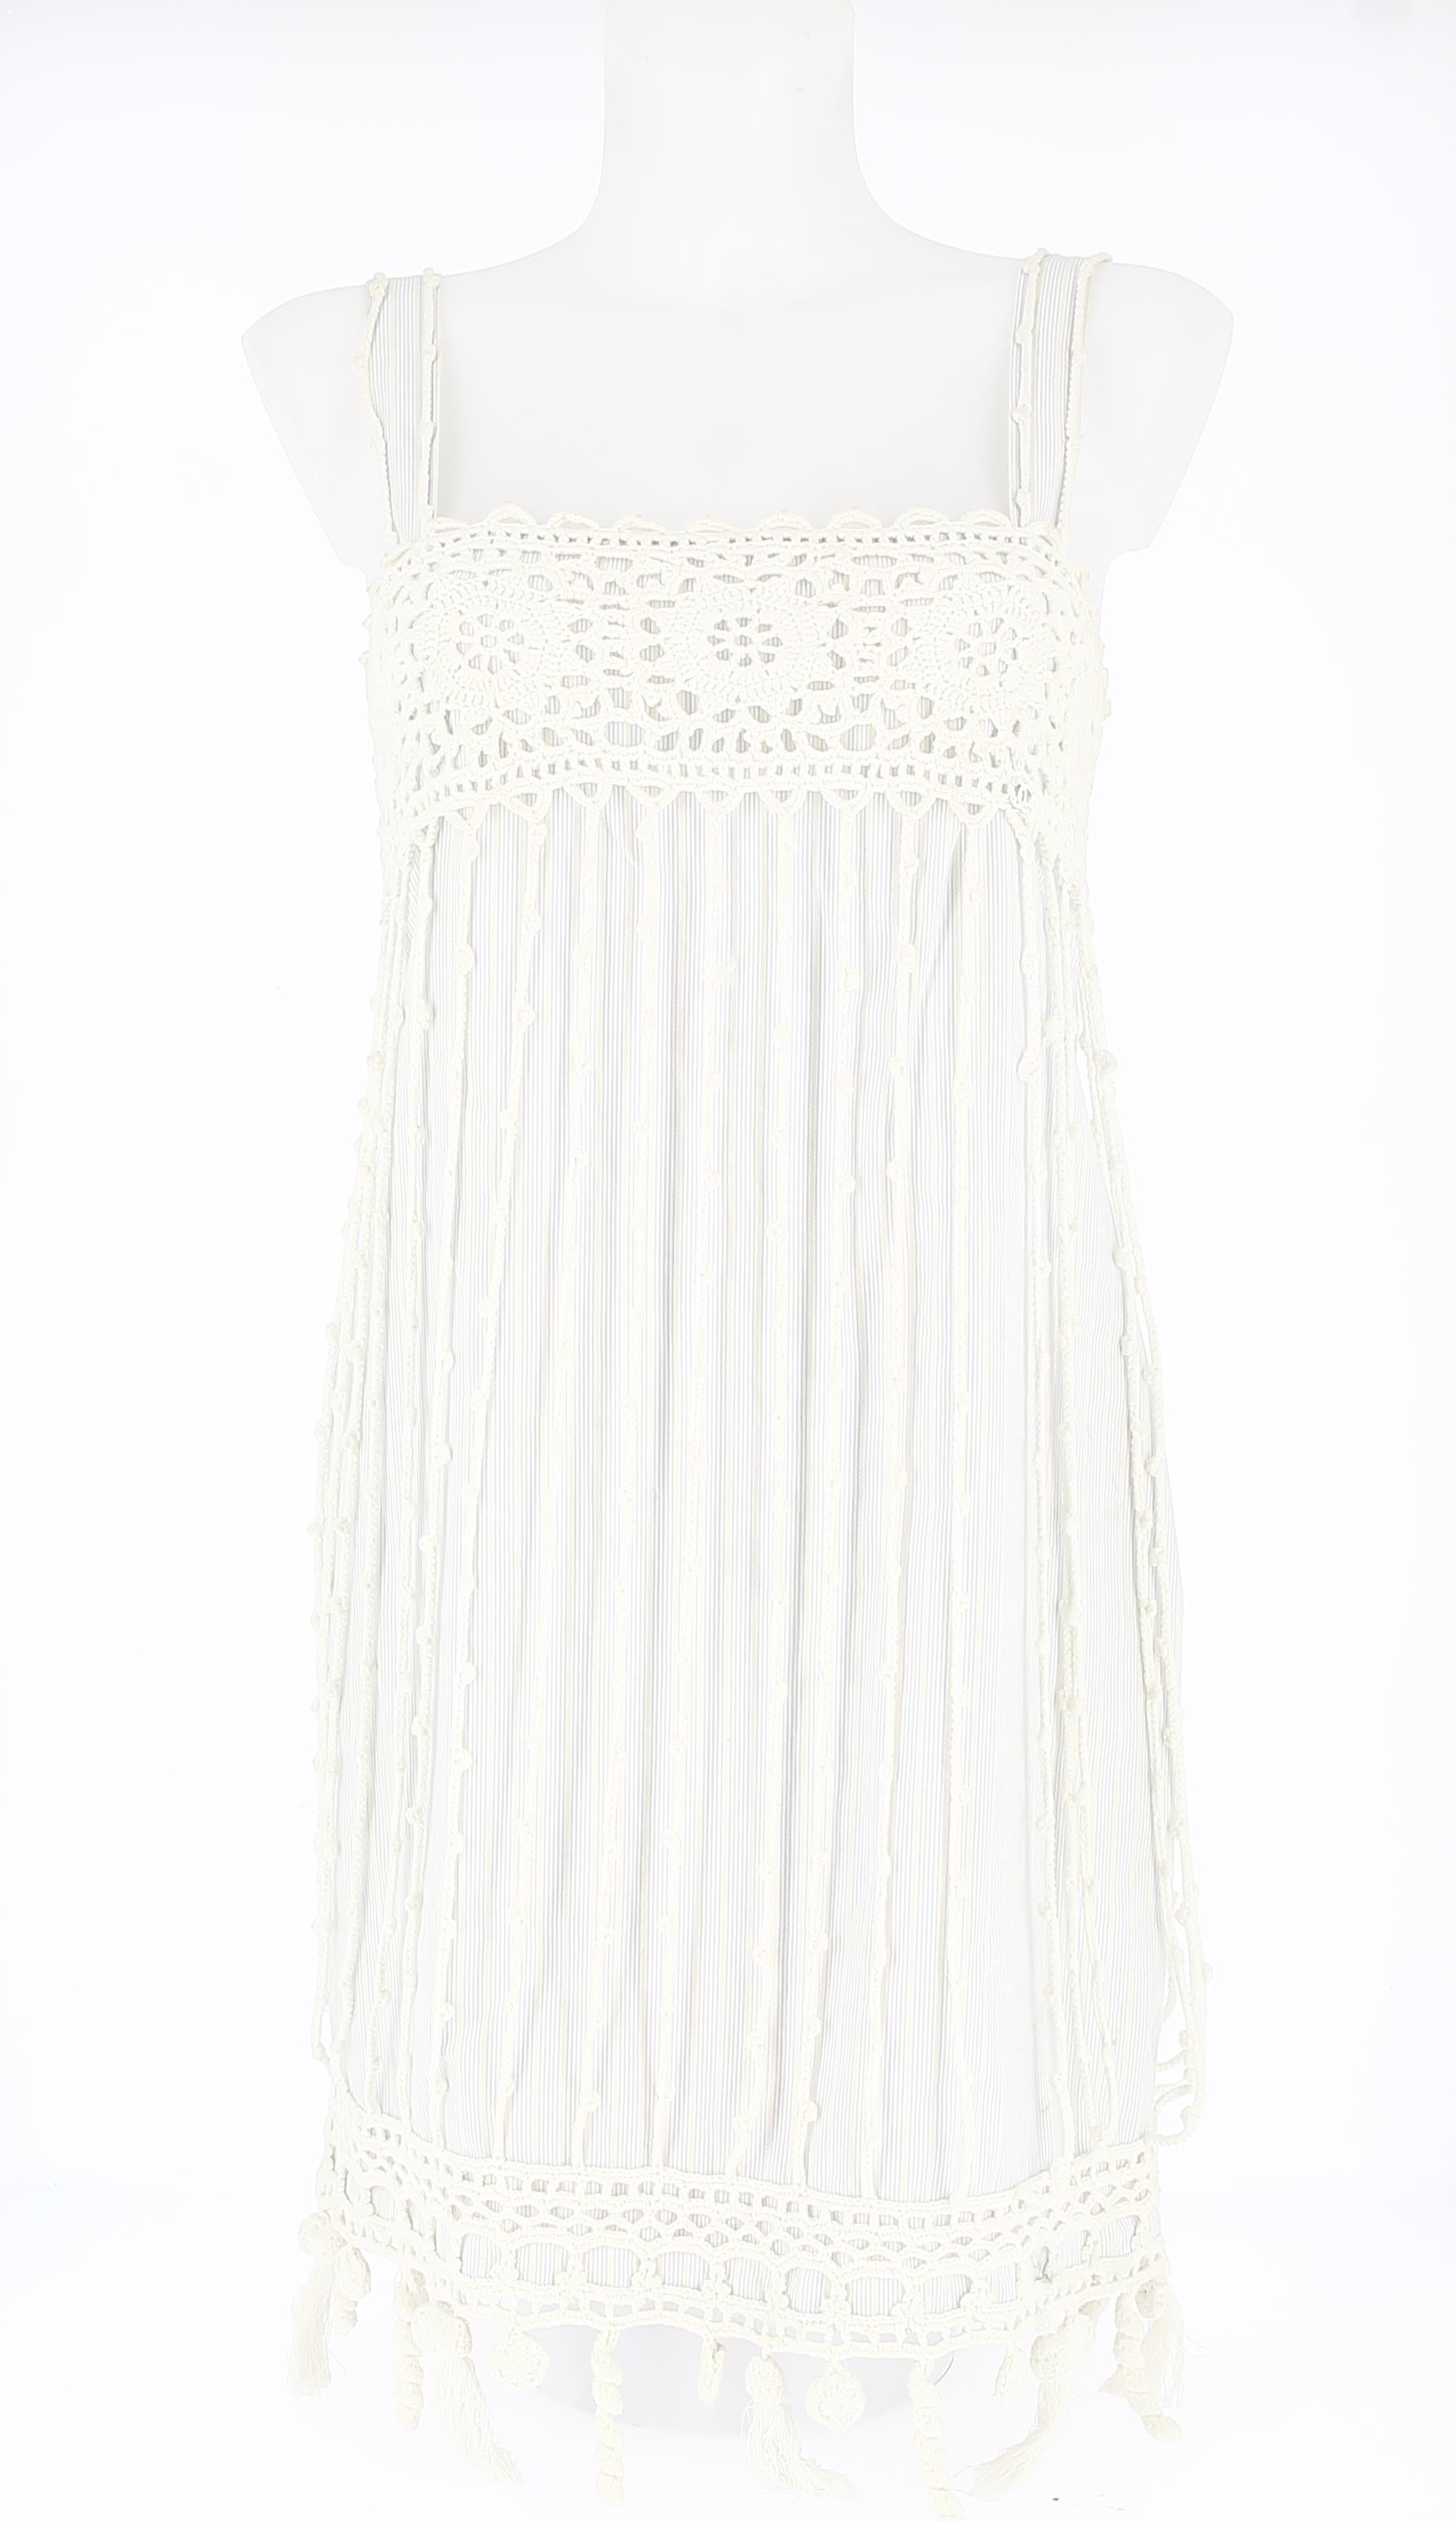 Chanel Cruise collection ready to wear dress.
Very good condition, shows very light signs of use on the fatening system.
Stripped blue and white cotton jersey dress, knit ropes and small knots in white wool, zipper fasening on the back.
Size